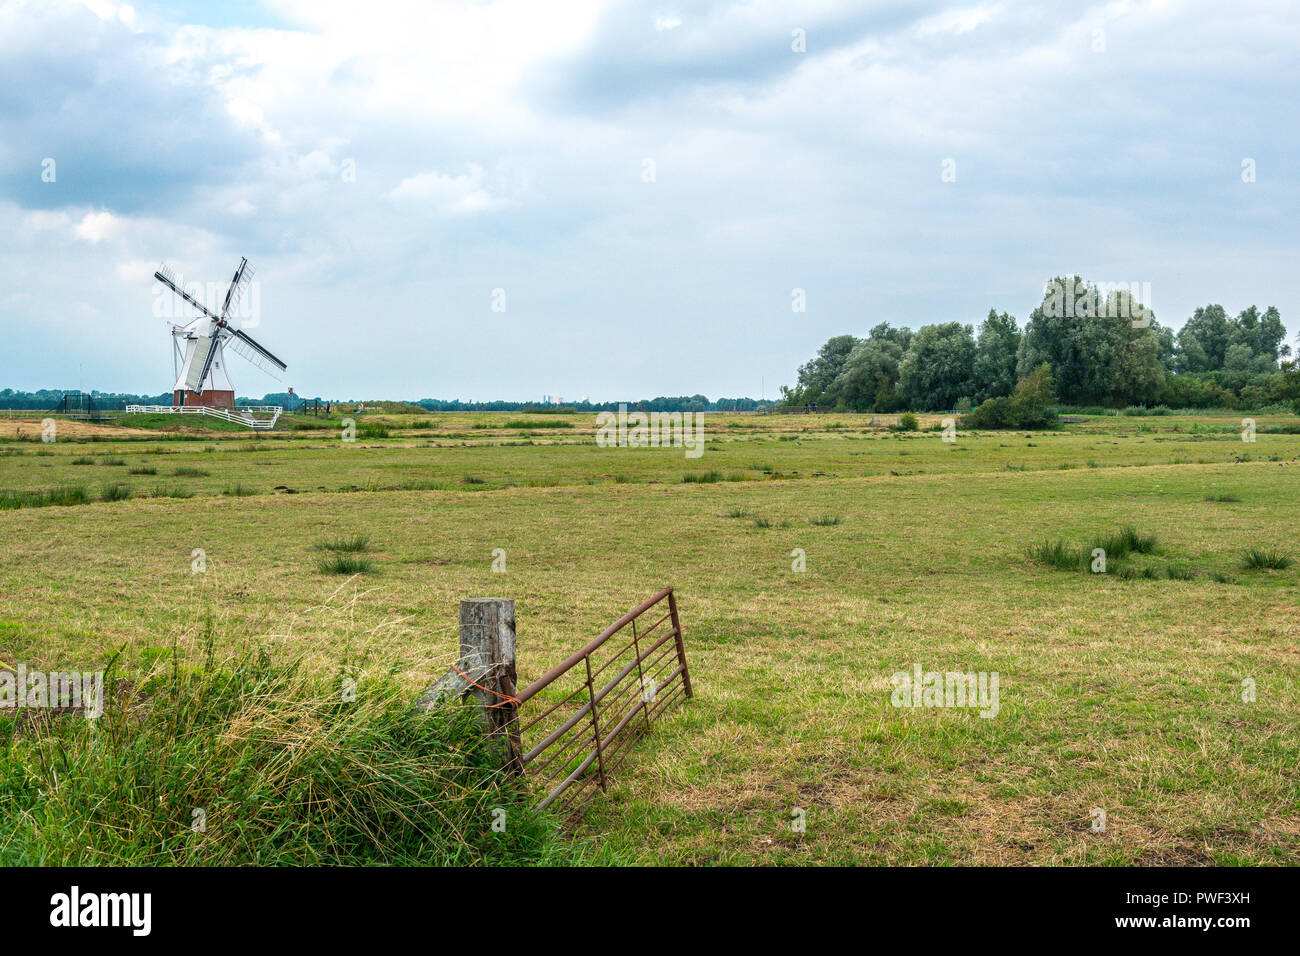 Groningen, Netherlands, August 15, 2018: The White mill (Witte molen) at Groningen, a typical Dutch historic mill in the north of The Netherlands Stock Photo